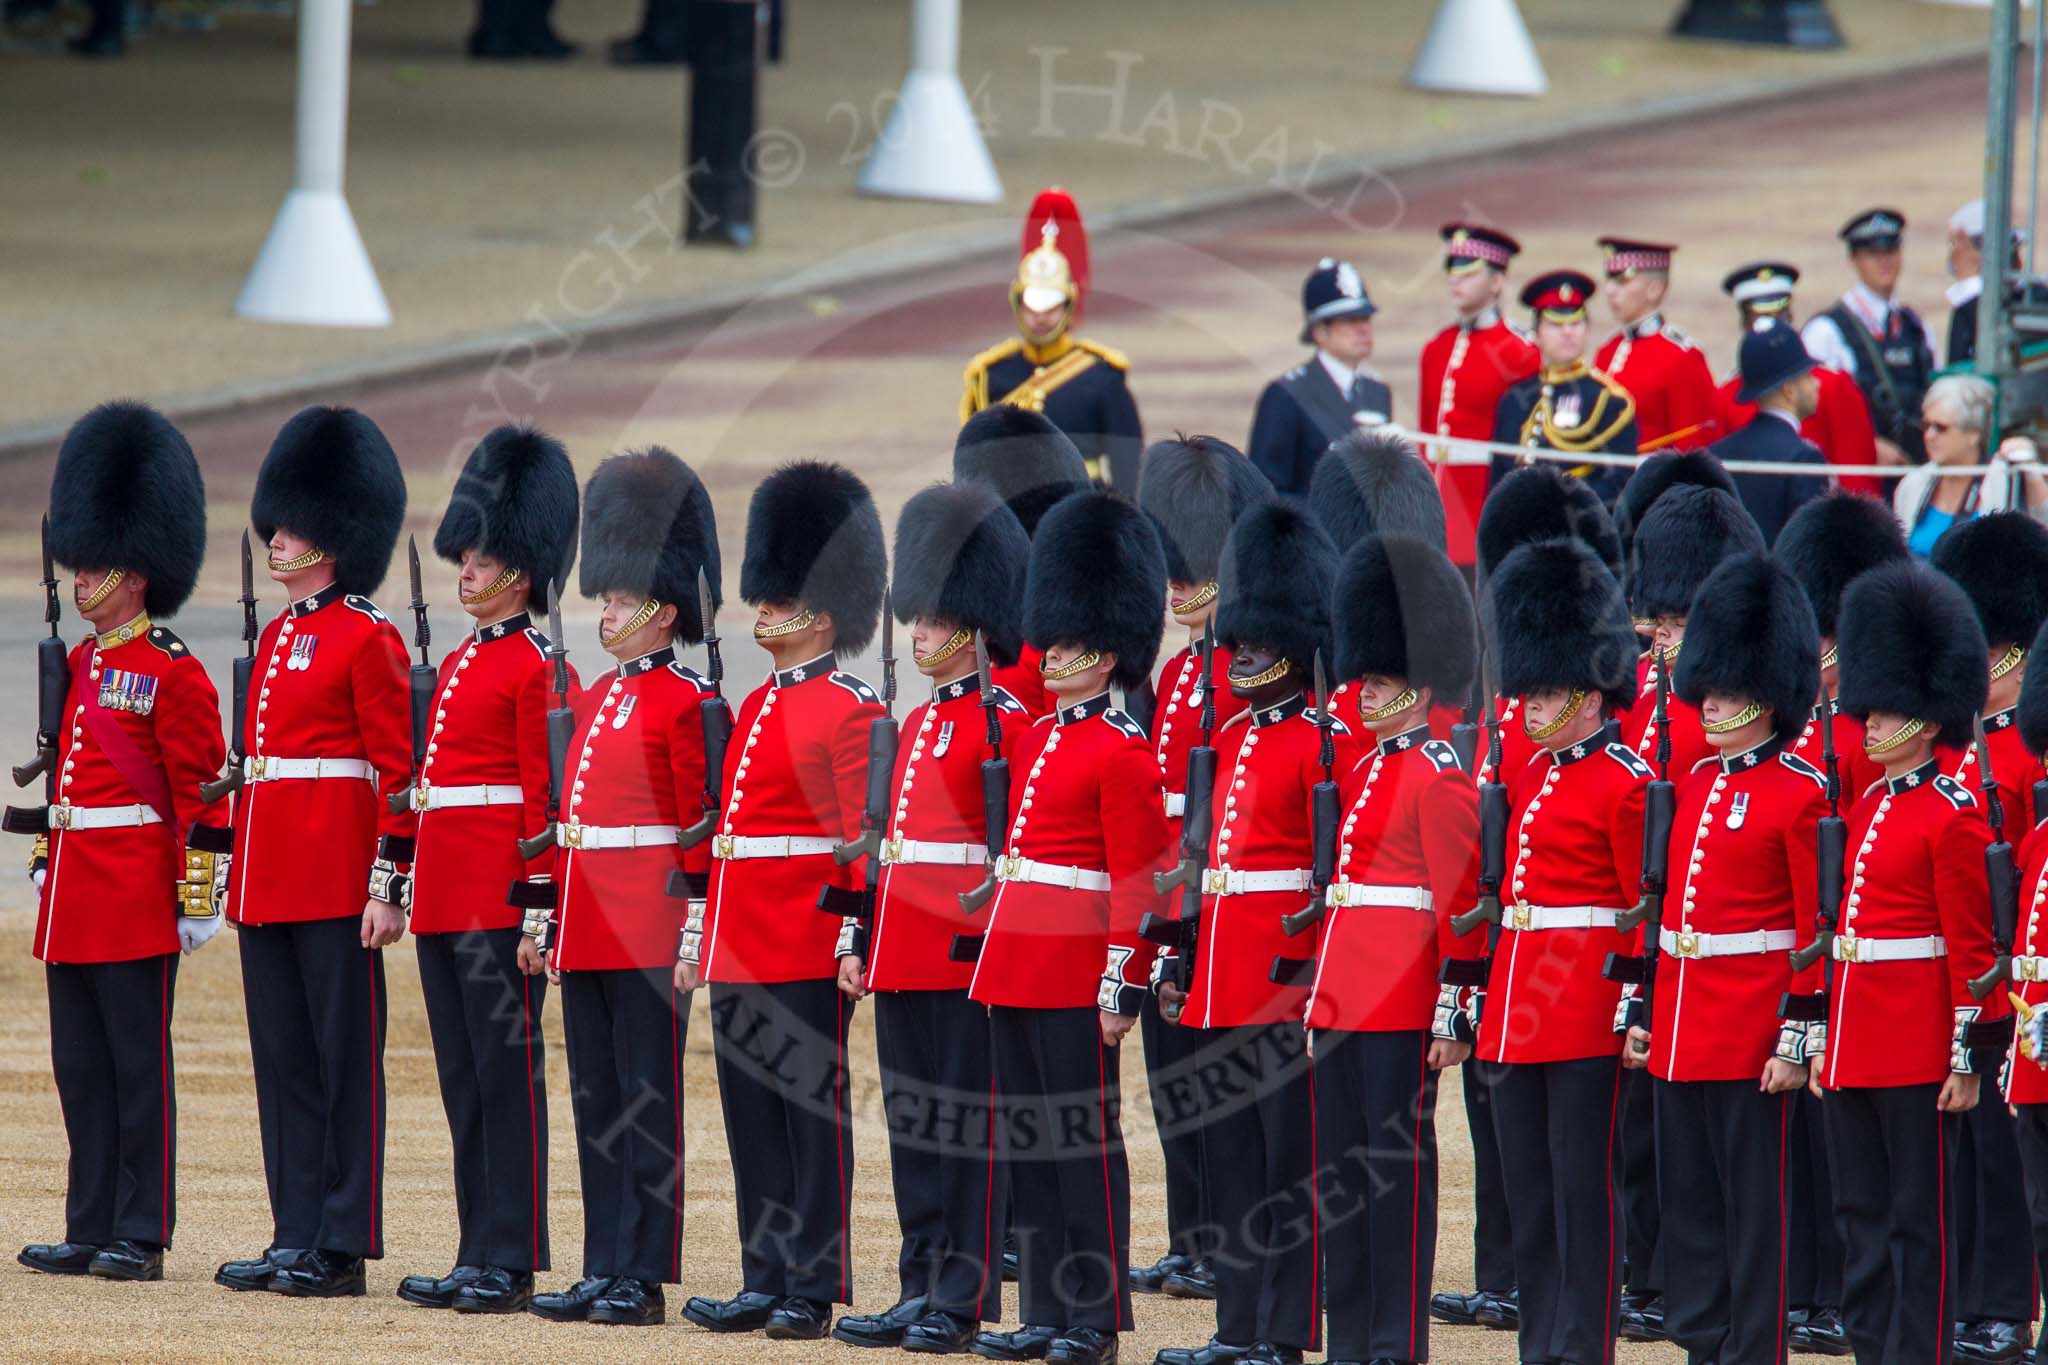 Trooping the Colour 2014.
Horse Guards Parade, Westminster,
London SW1A,

United Kingdom,
on 14 June 2014 at 11:01, image #382